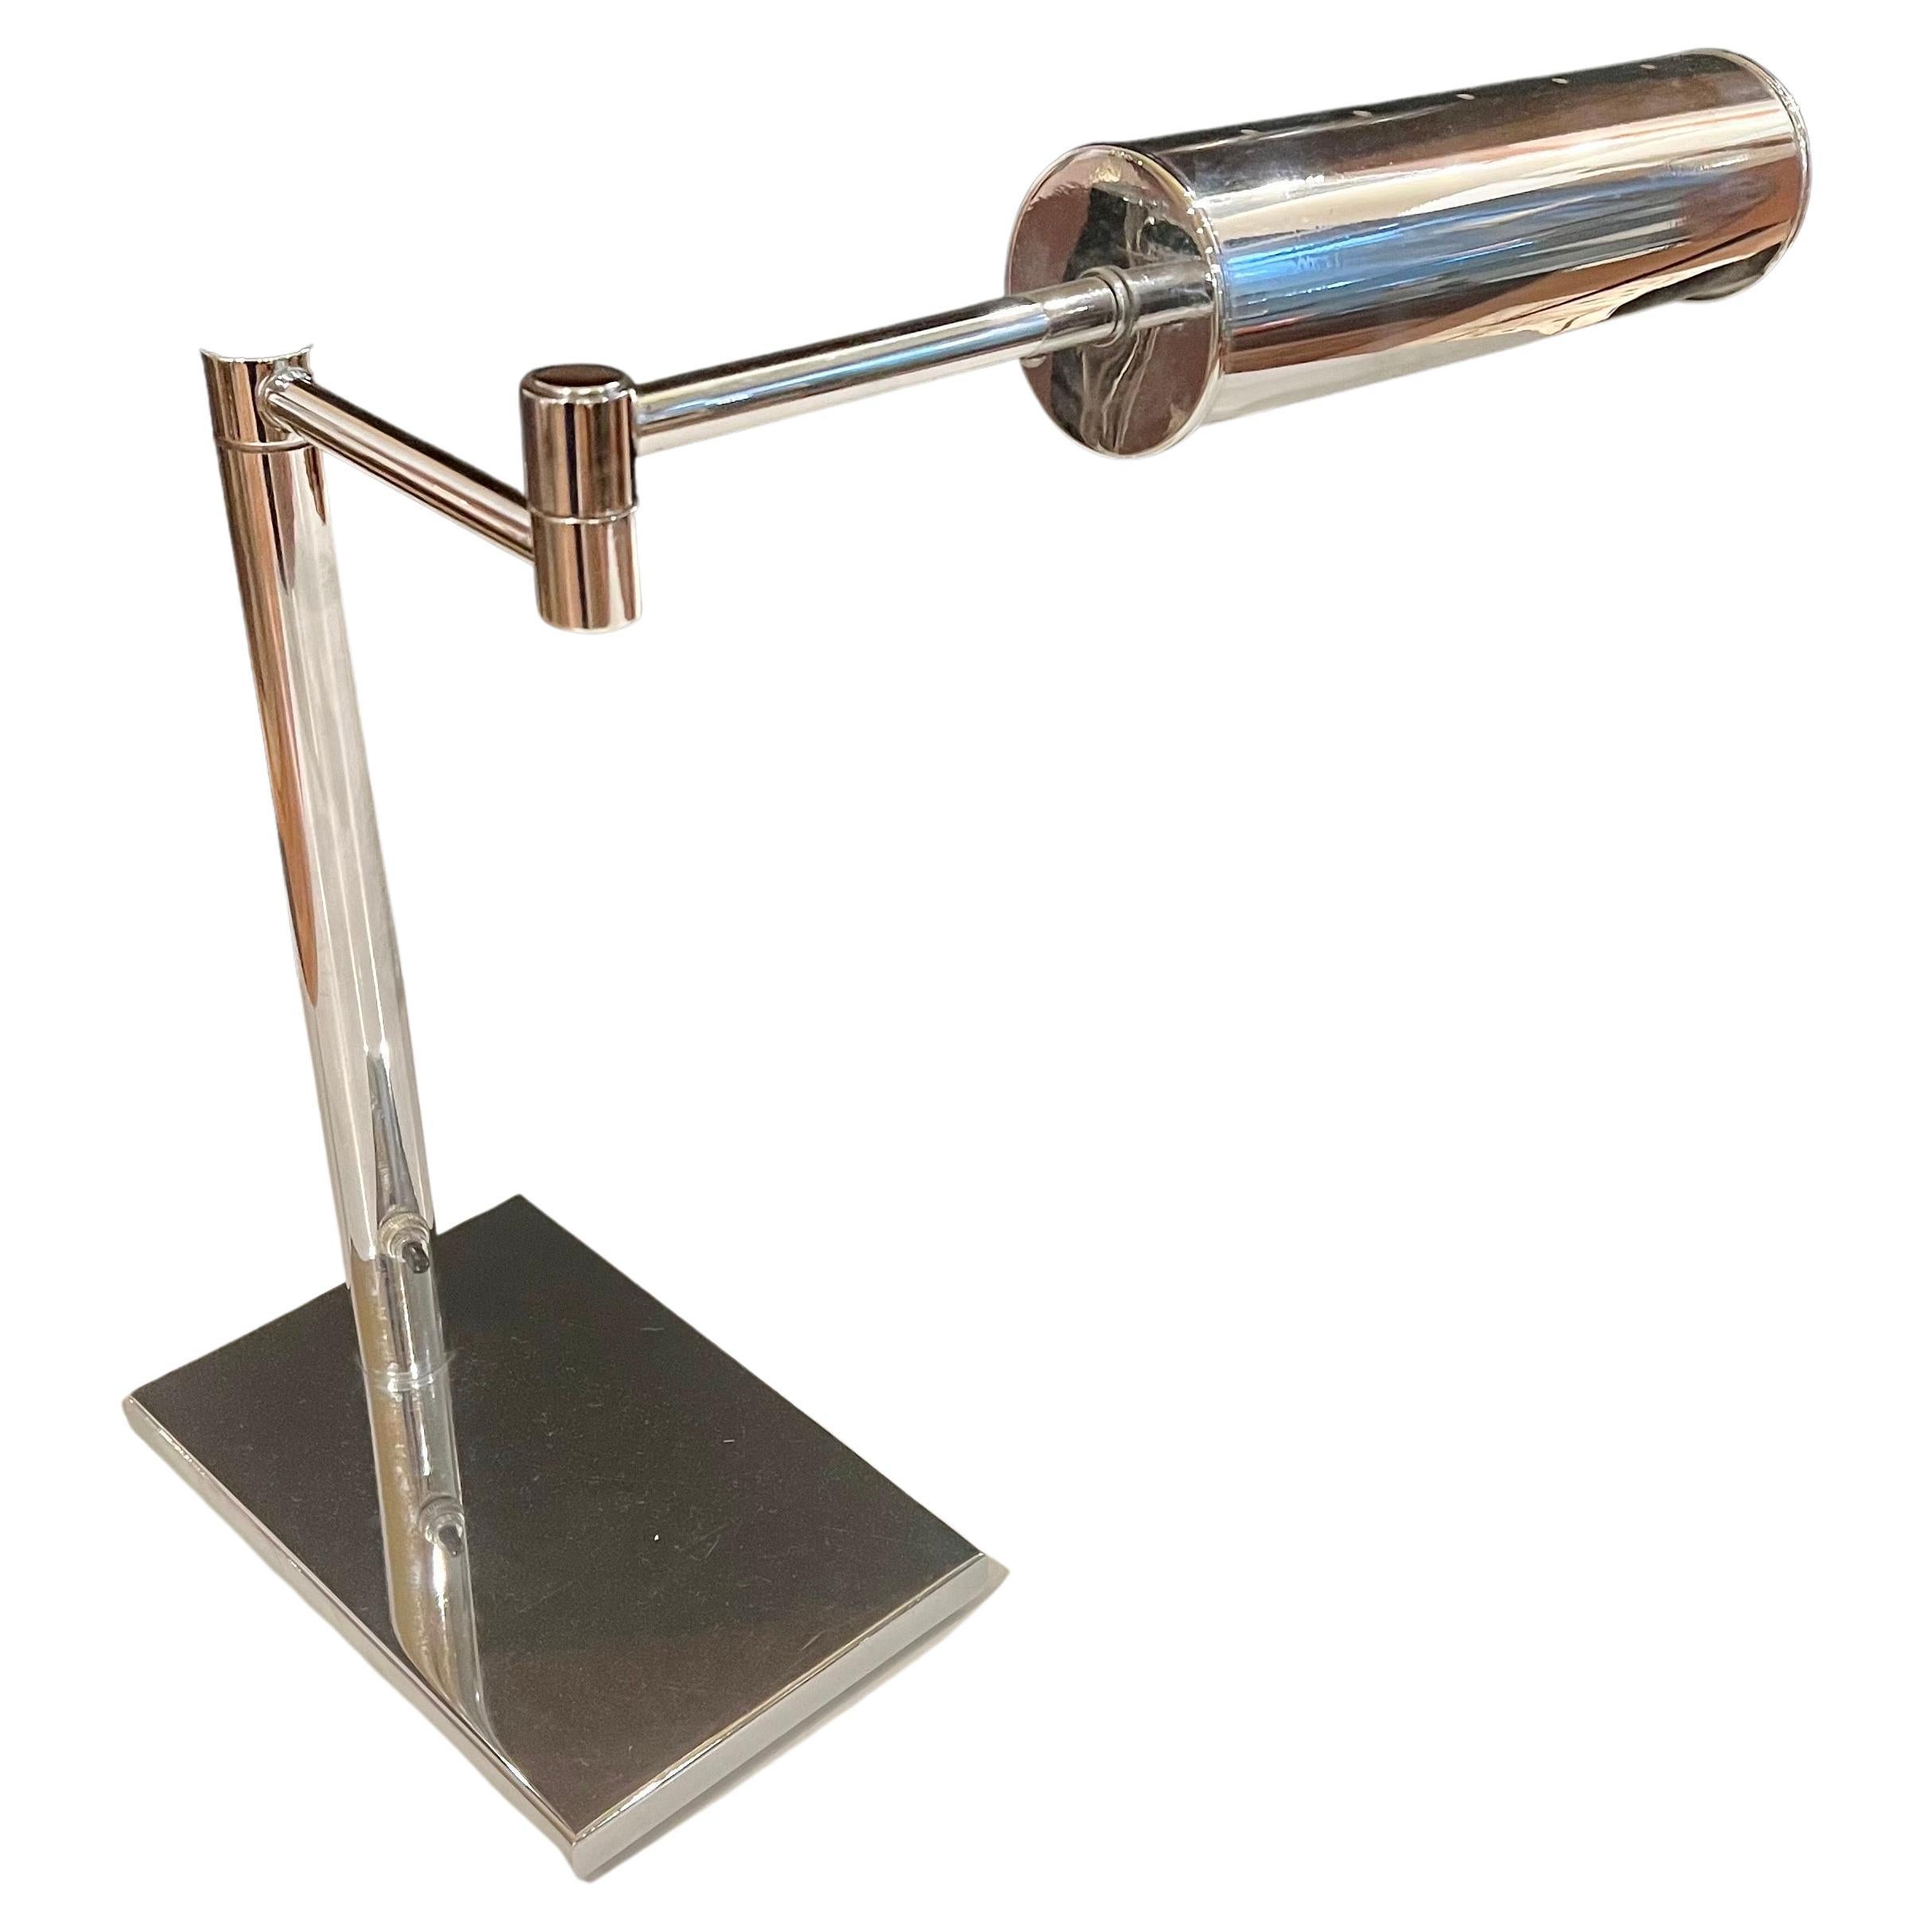 Beautiful and rare multidirectional desk lamp by Nessen Studios in chrome finish and steel, with perforated shade shown that rotates side to side, and the classic Nessen arm retractable system.